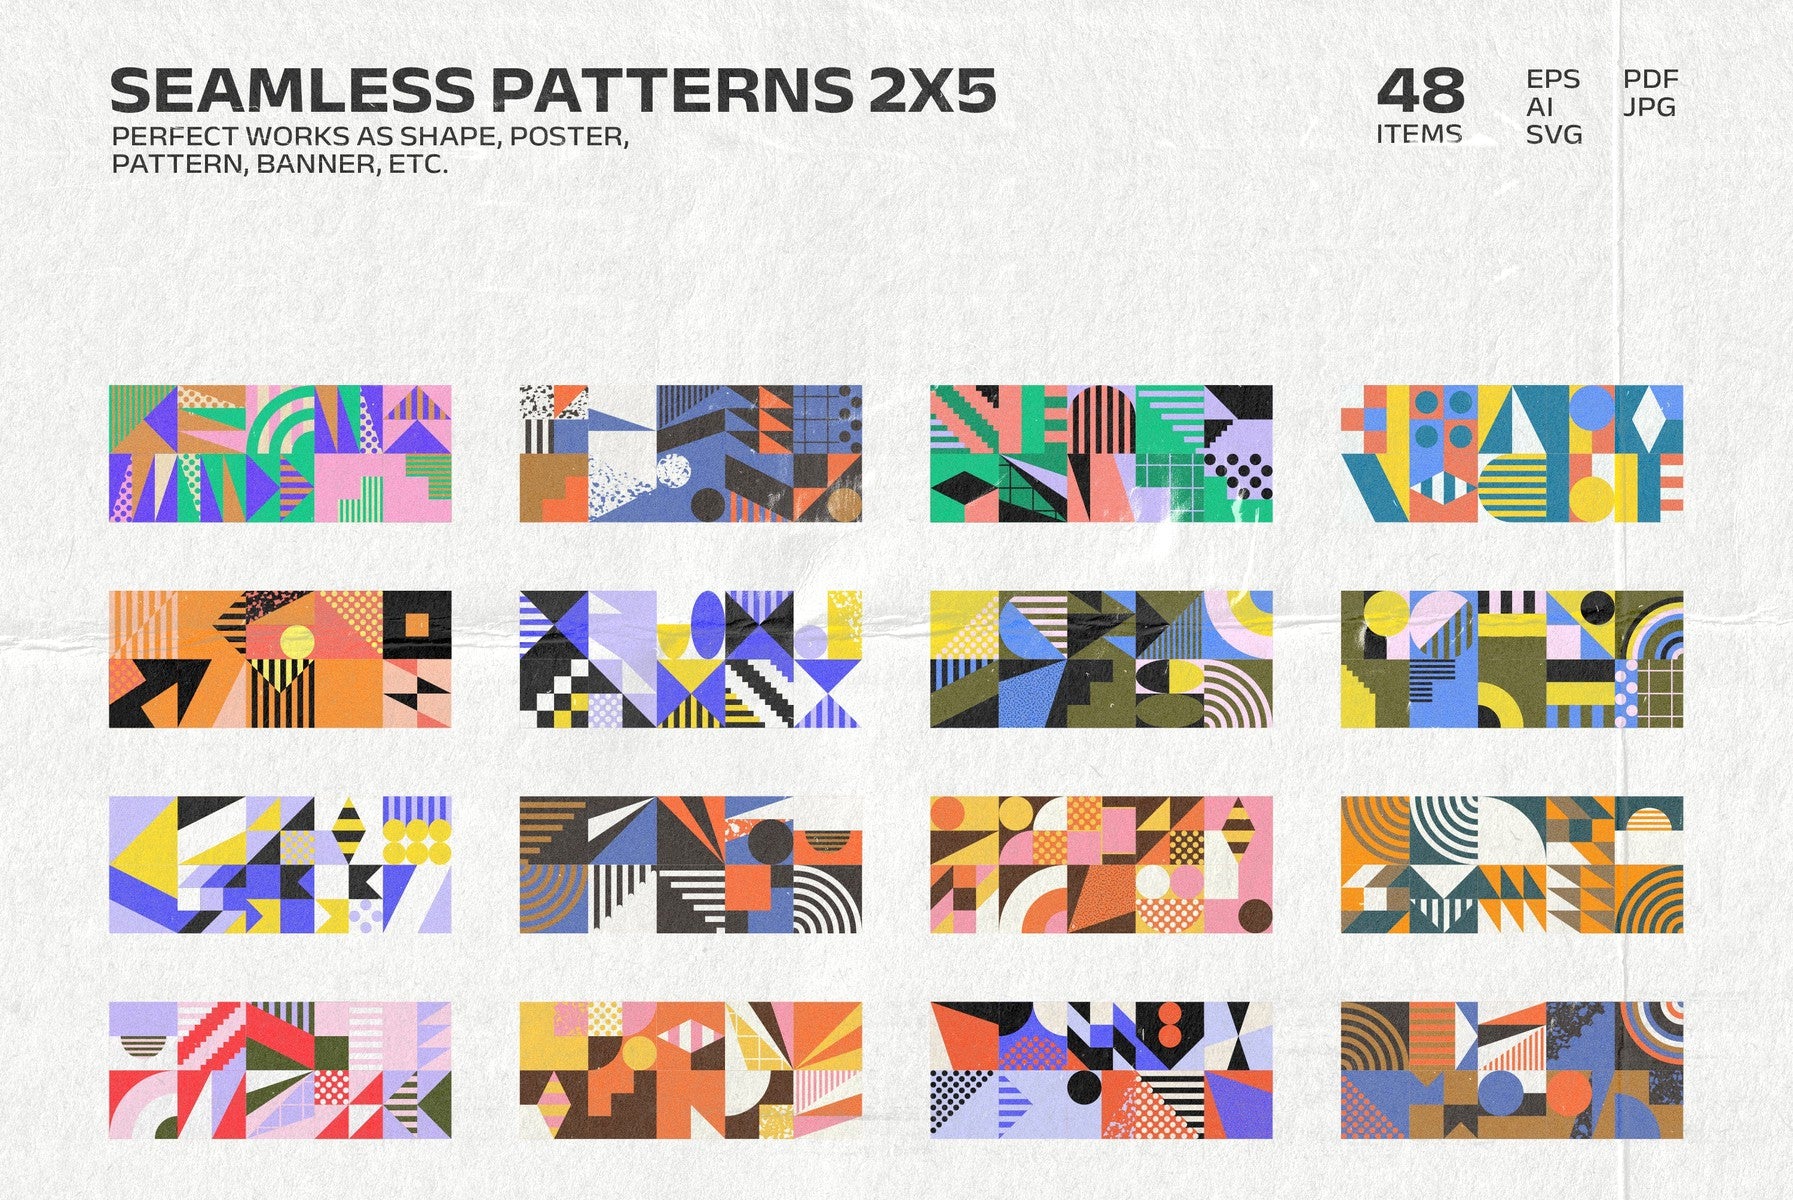 318 Shapes Patterns Posters Part 1